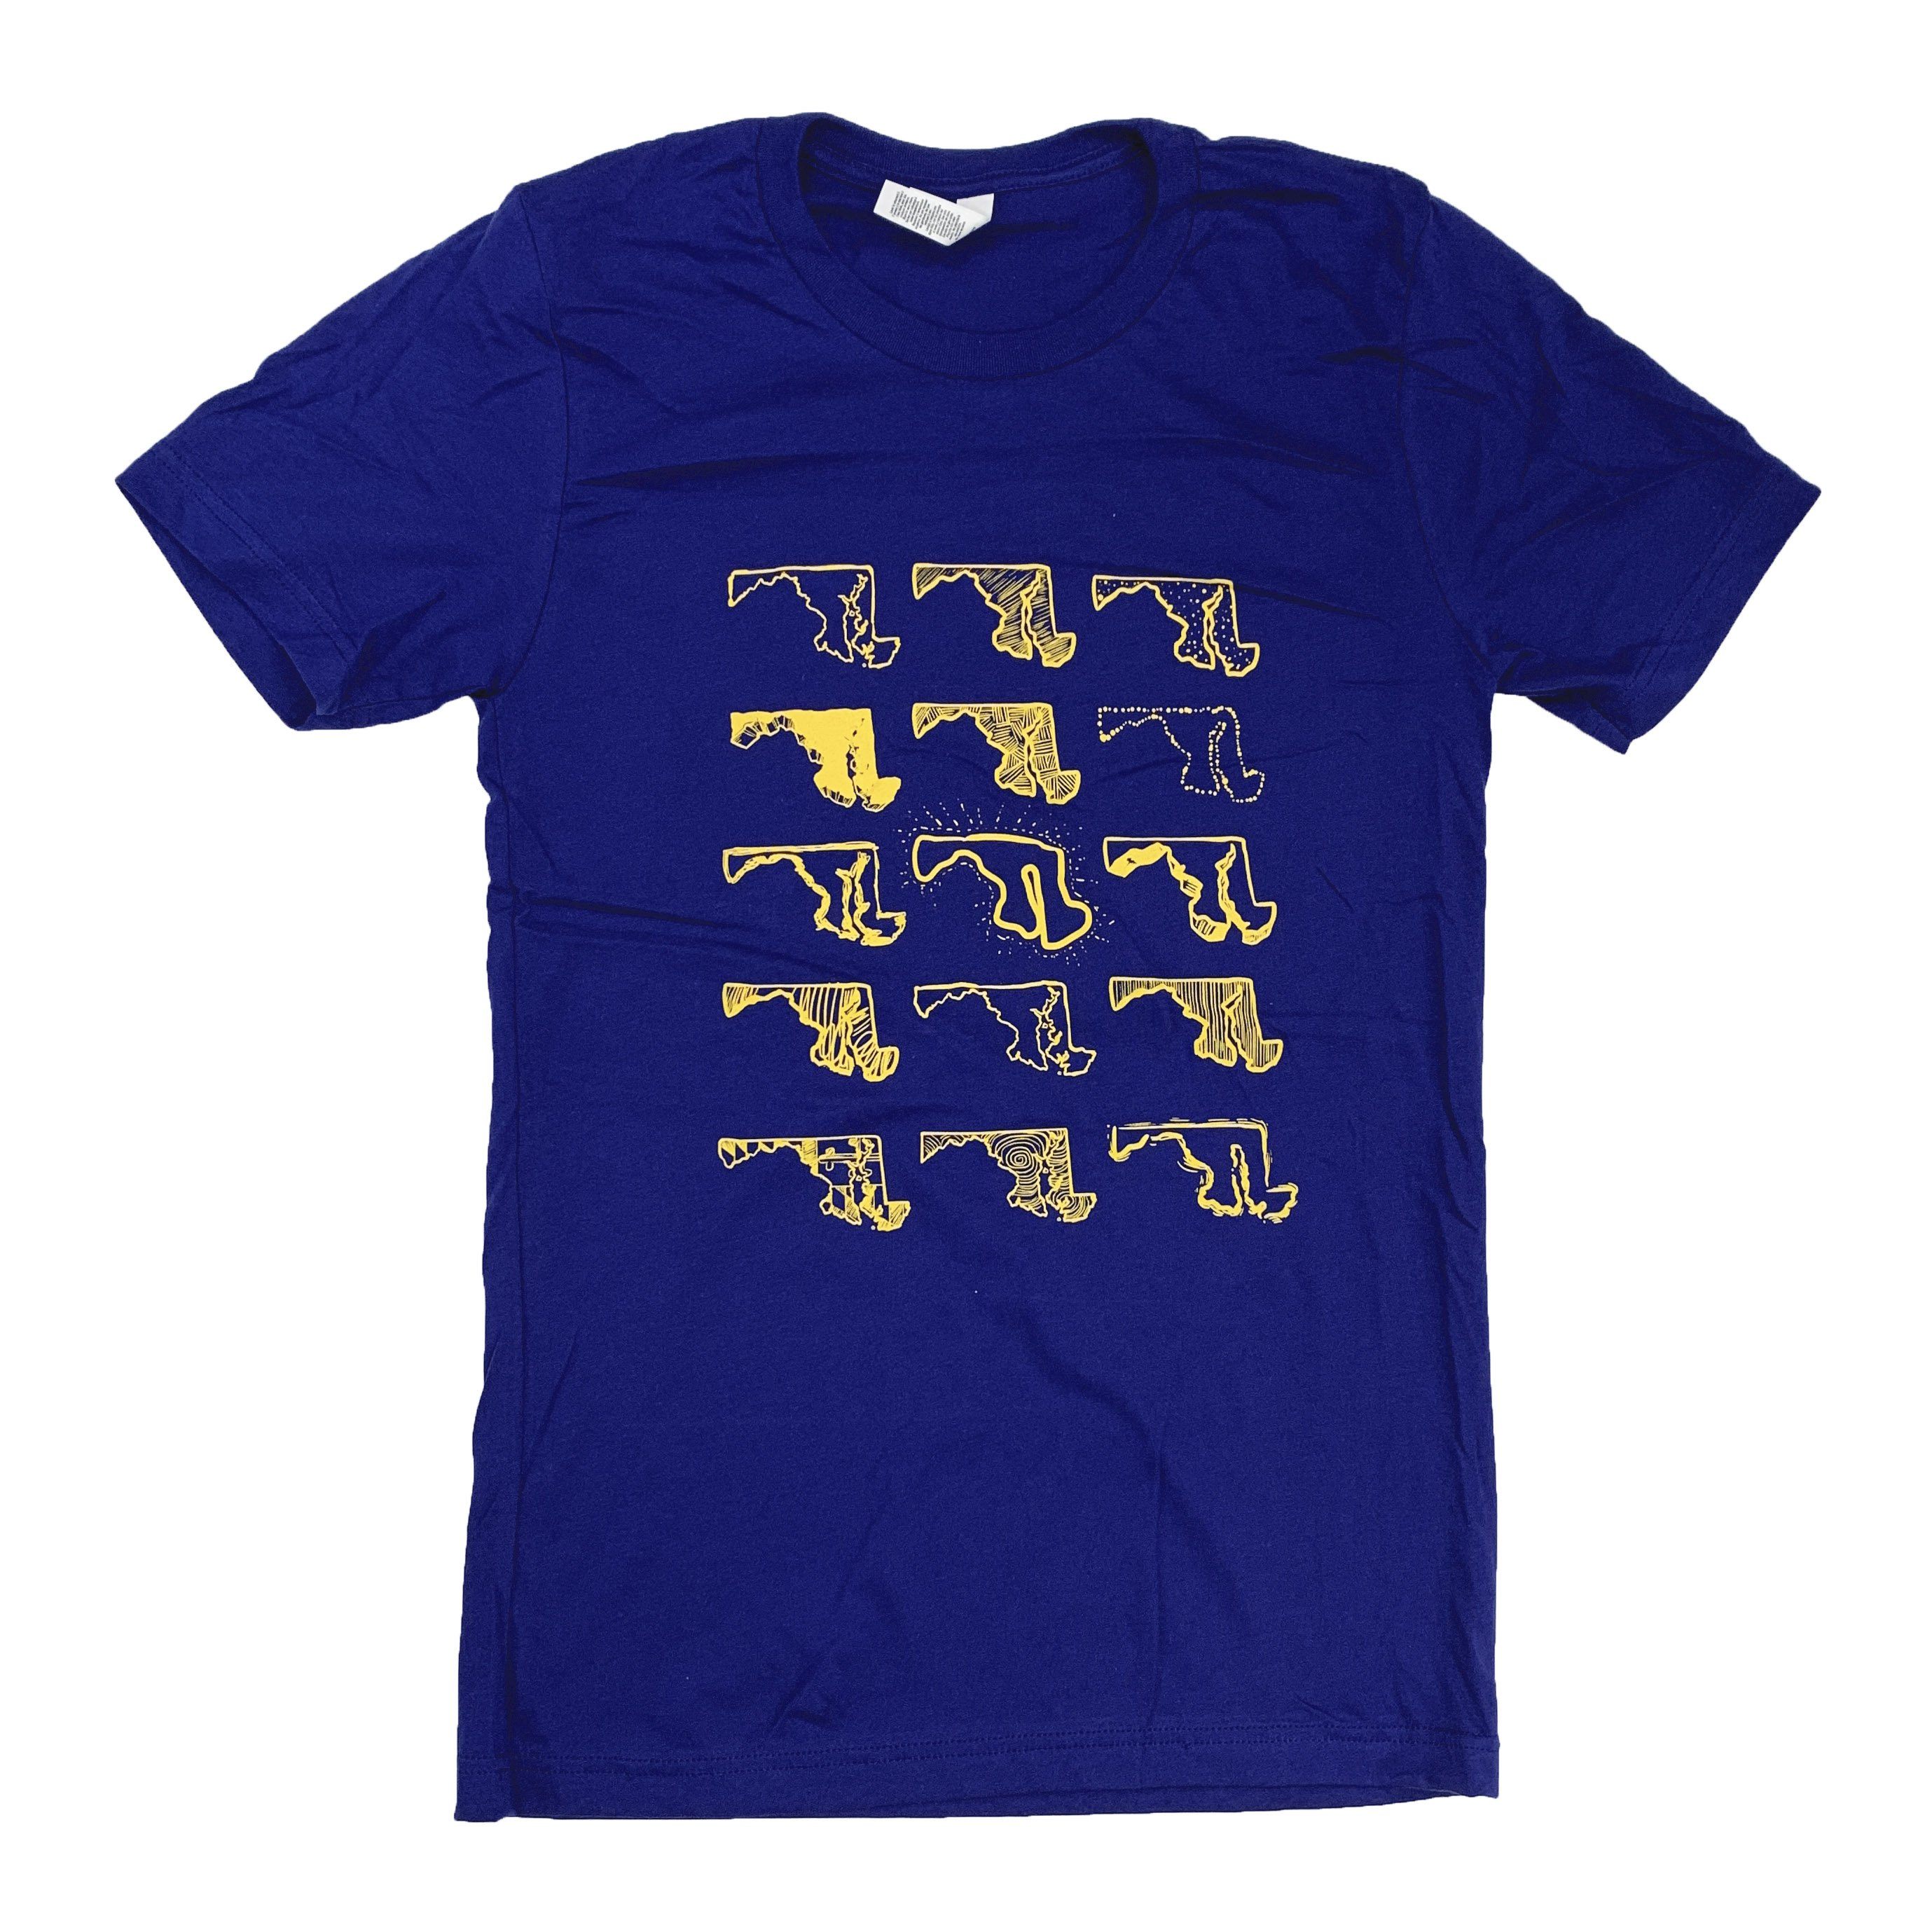 Many Shapes of Maryland (Team Navy) / Shirt - Route One Apparel